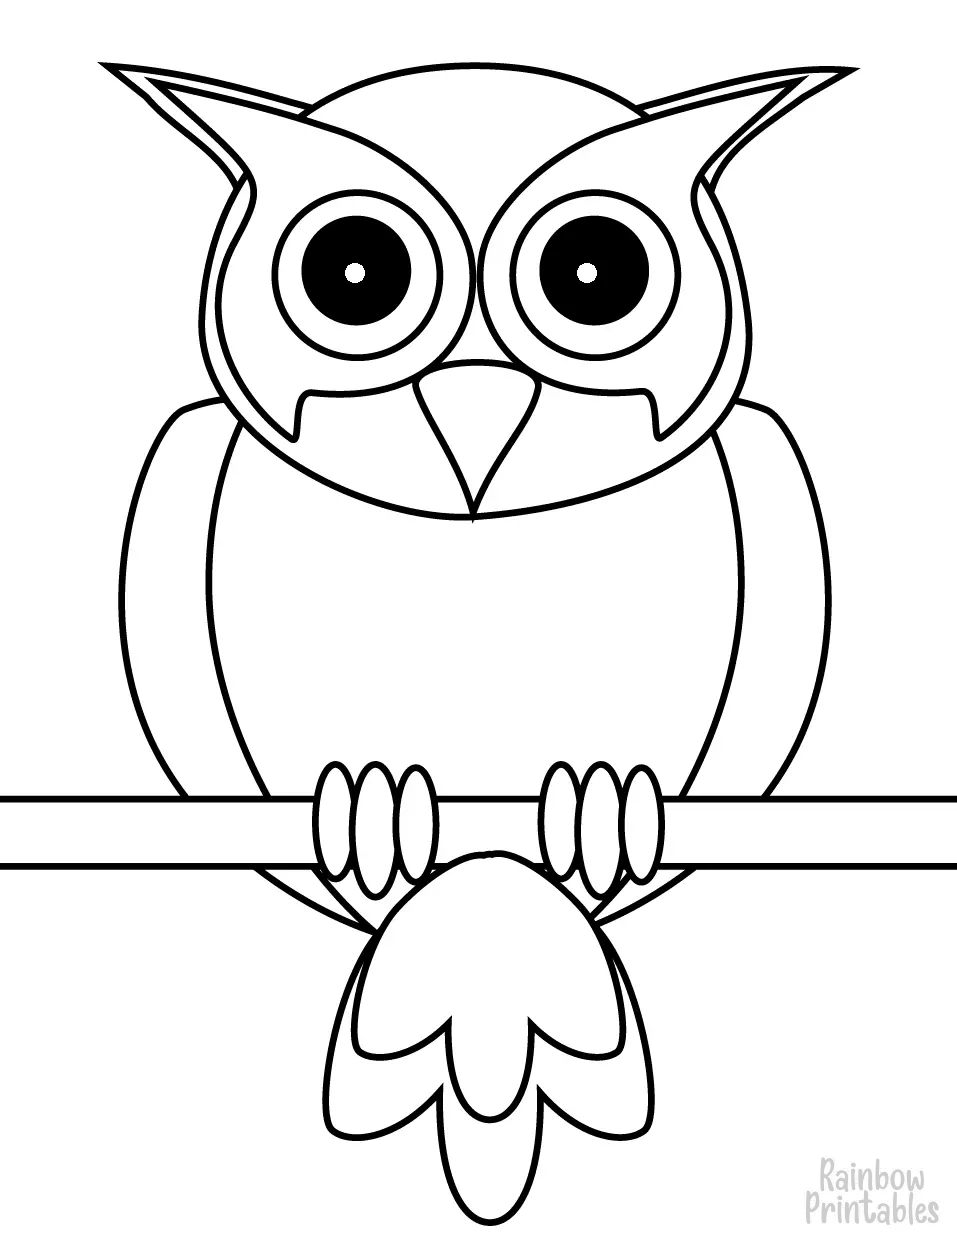 Simple Easy OWL Line Drawing Coloring Page for Kids